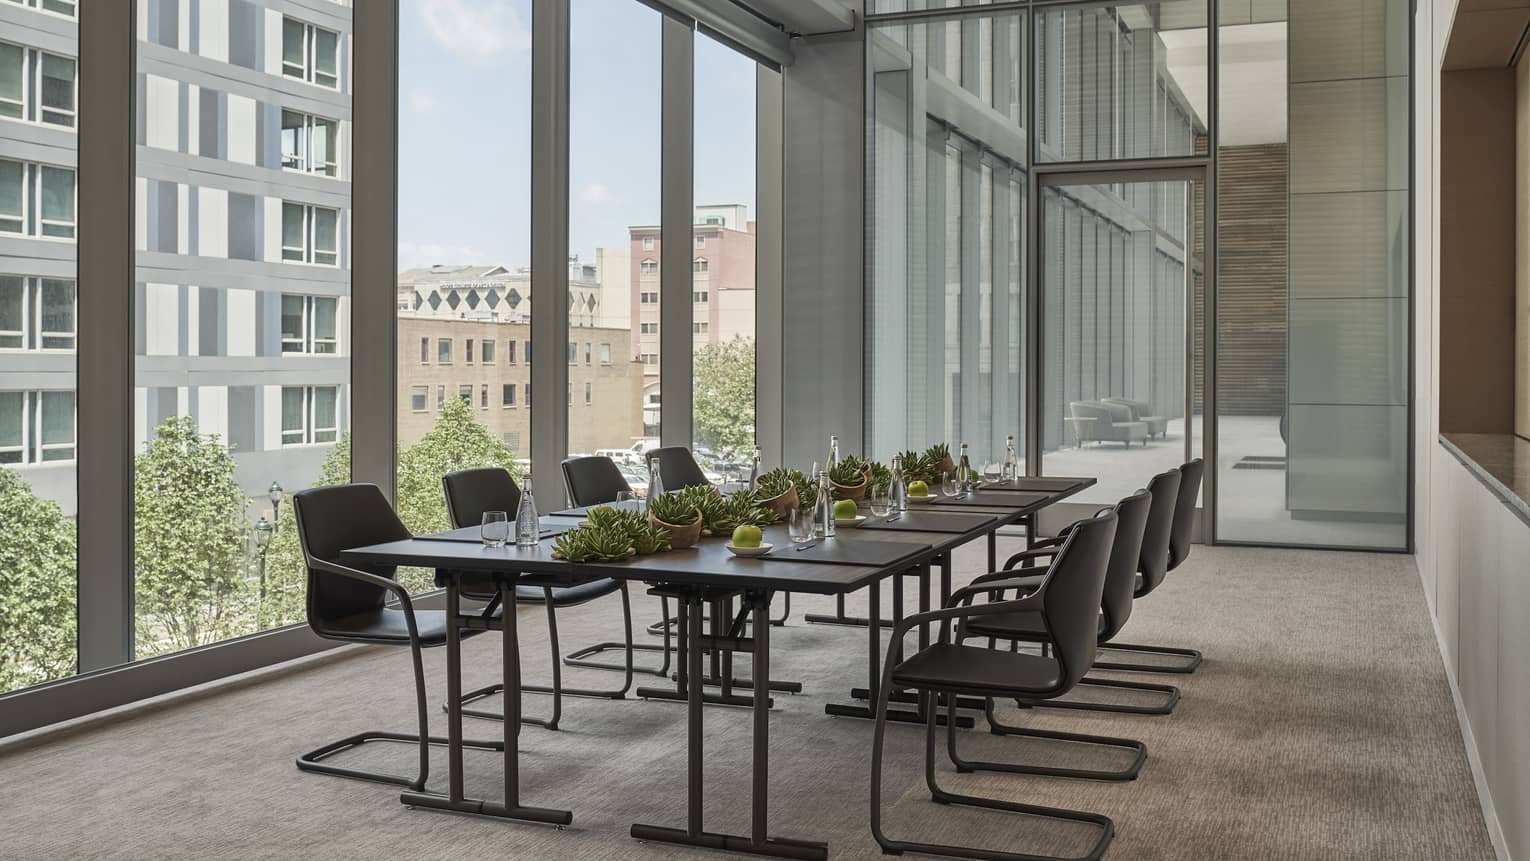 A boardroom table with many chairs next to a wall covered in large windows looking out at a city.